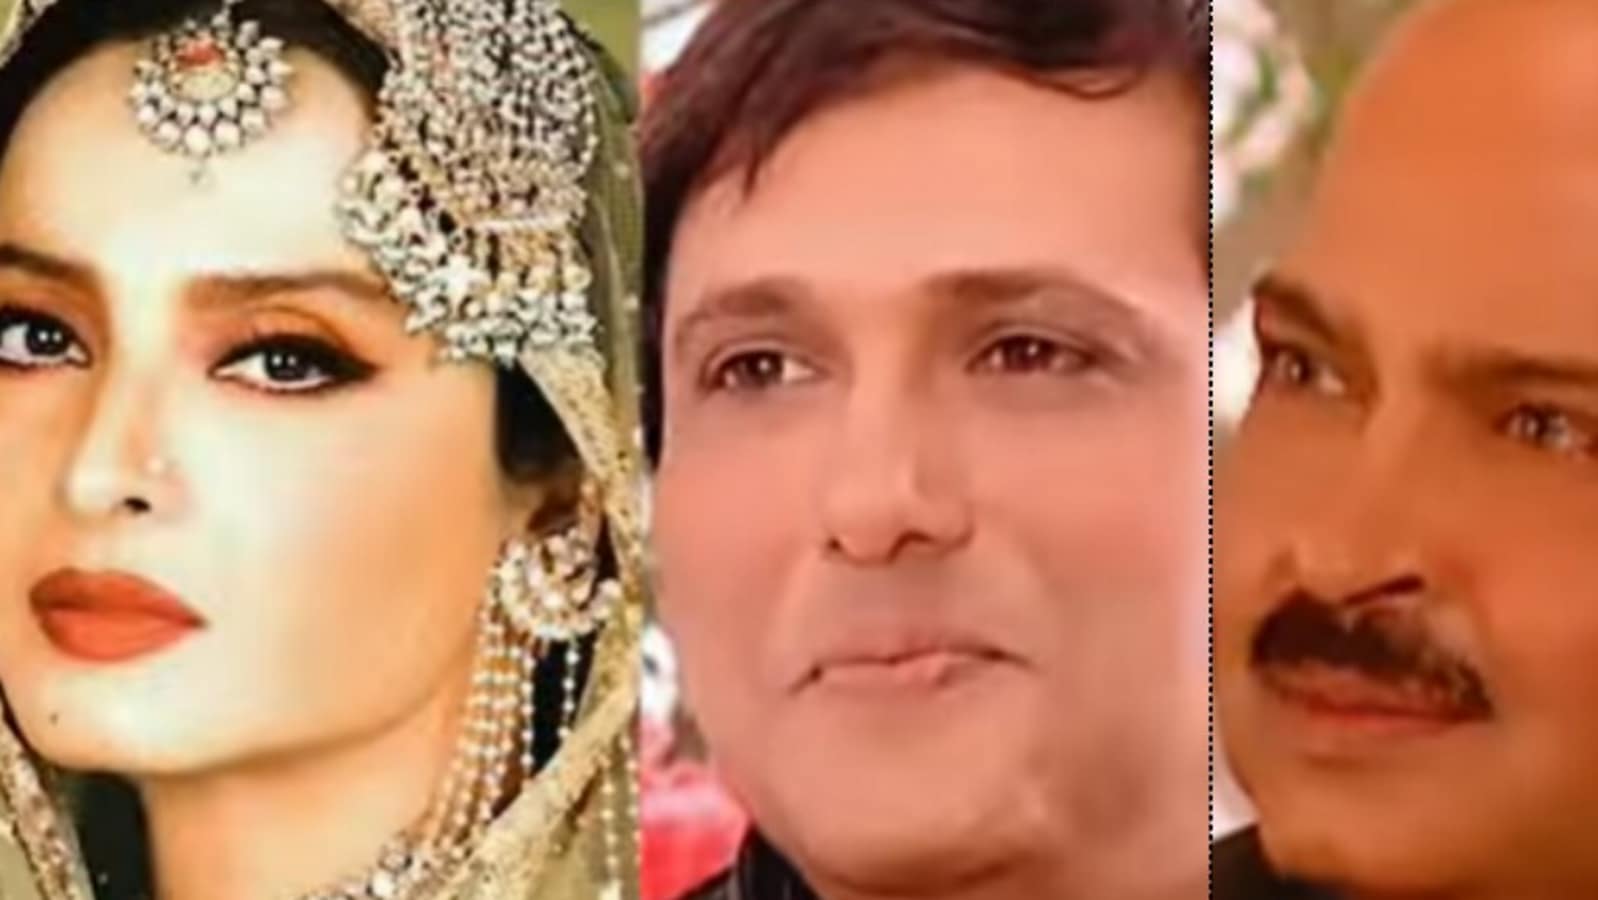 When 'very big fan' Govinda and Rakesh Roshan said they wanted to take Rekha out on a date. Watch